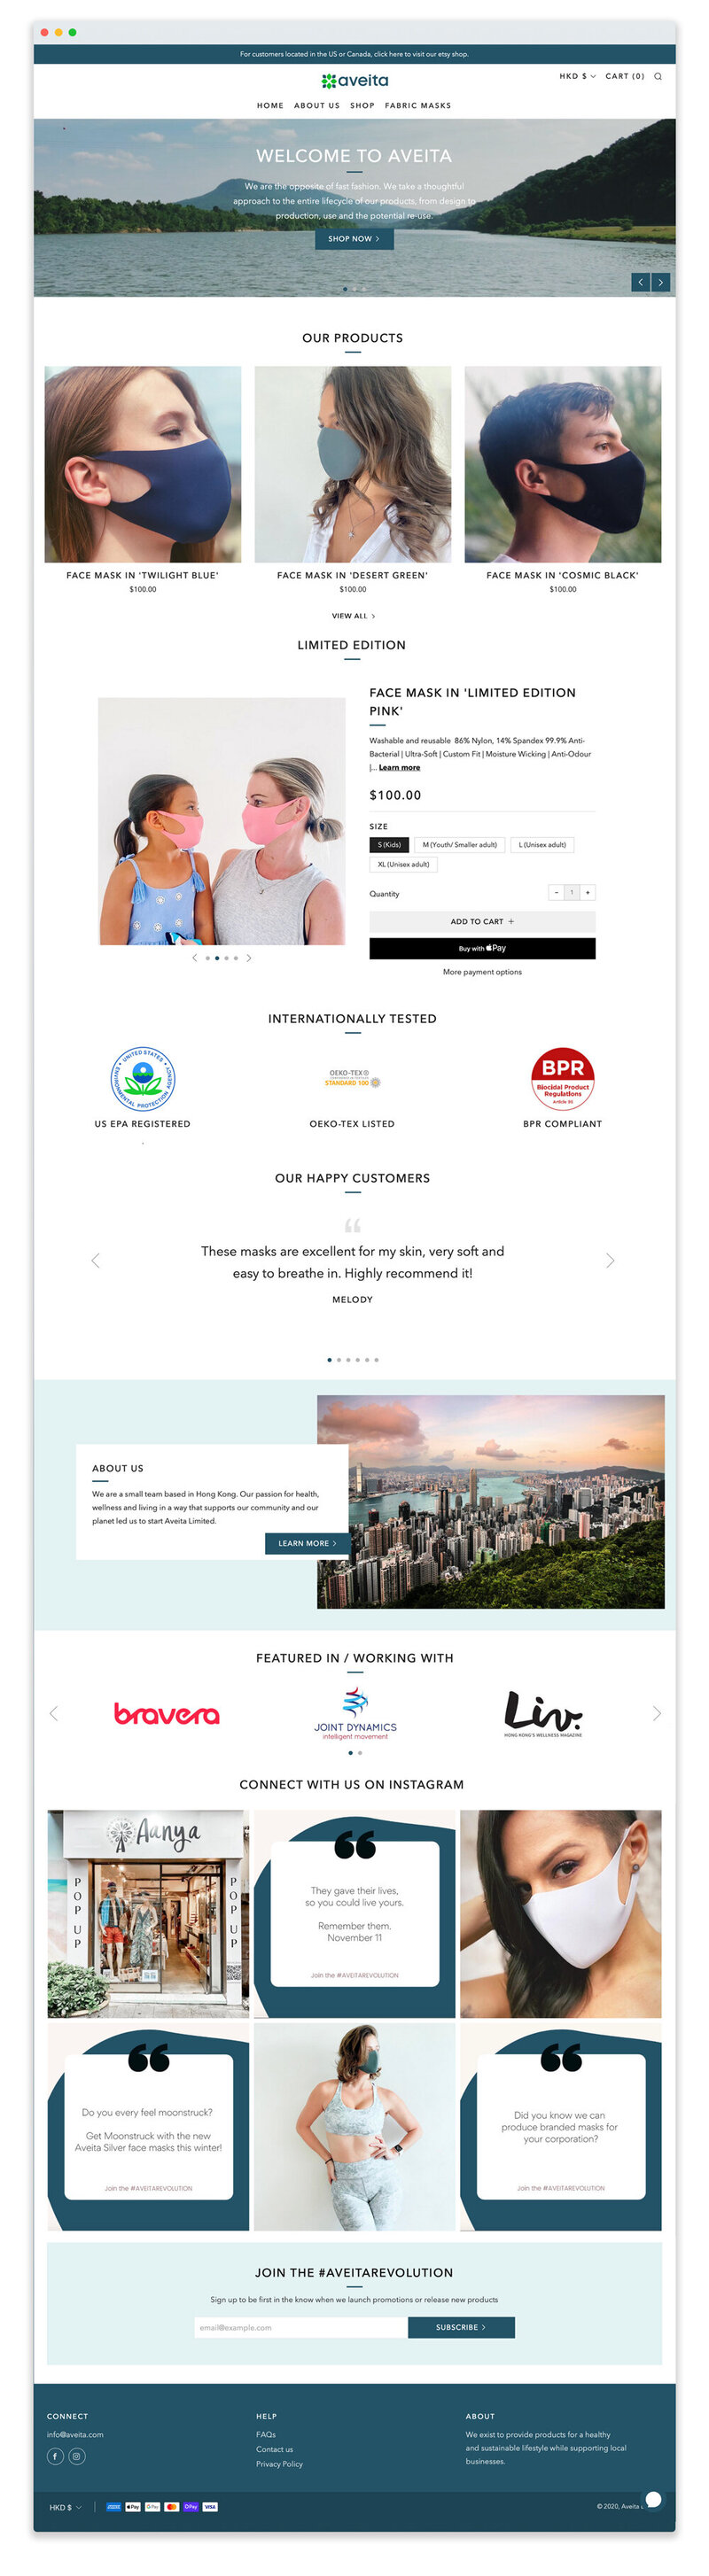 Hong Kong Web Design Service for E-Commerce Brand in Health and Wellness Industry, Aveita Limited by Website Designer Kyra Janelle.